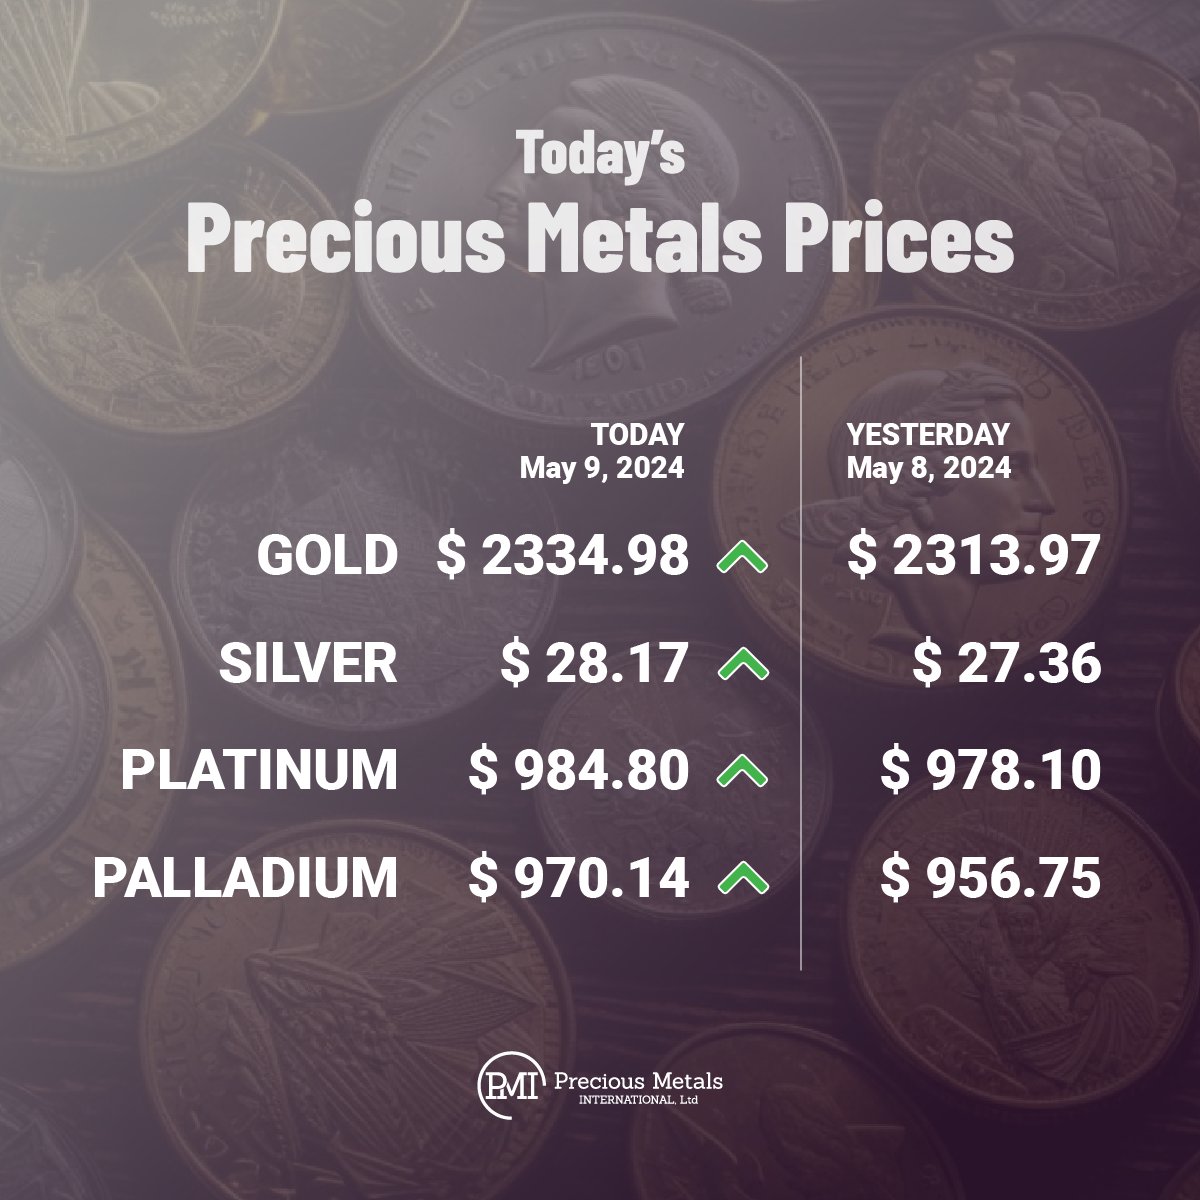 Today’s precious metals prices as of Thursday, May 9th, 2024.
·
·
·
#BullionPMI #Gold #Silver #Platinum #Palladium #PreciousMetals #Prices #BuyGold #BuySilver #InGoldWeTrust 🥇💛🟡🌕🟨🪙⬜️🔘◻️📈✨🤯👍🏼🔥